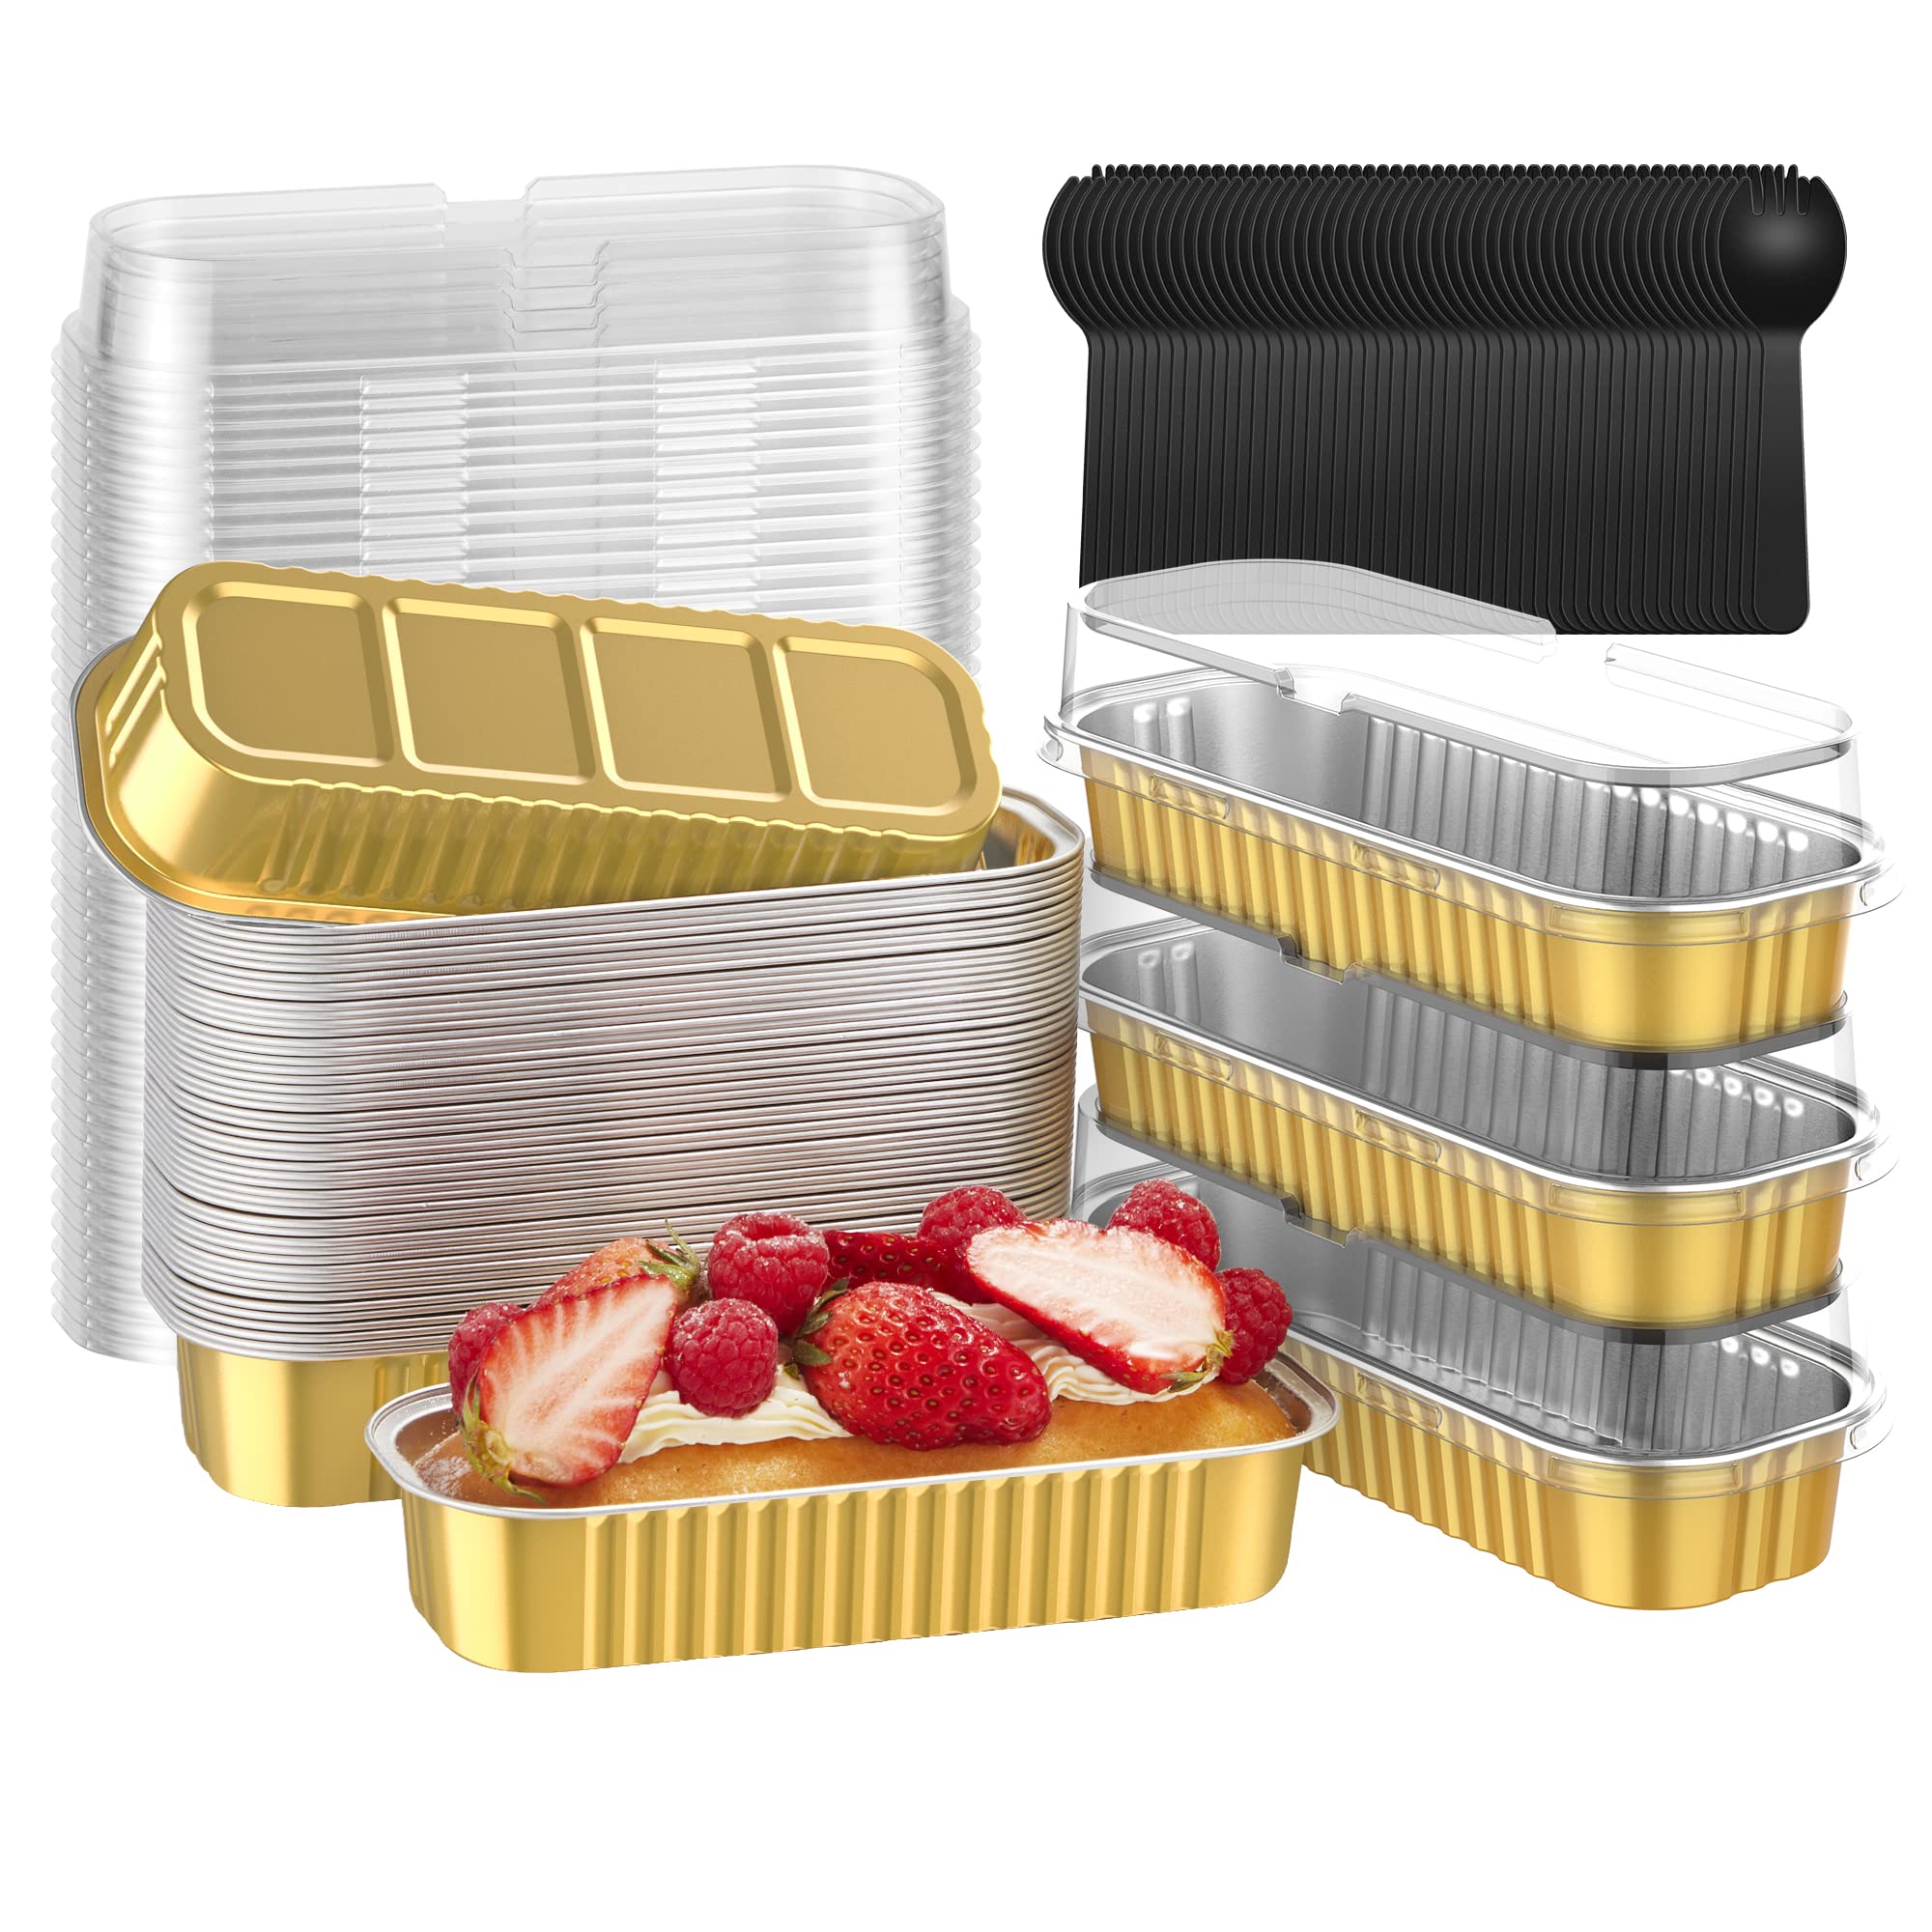 Kootek Mini Loaf Pans with Lids and Sporks (50 Pack, 6.8oz), Rectangle Aluminum Foil Cake Tins Containers, Disposable Baking Cups Cupcake Liners Muffin Tins for Mini Loaf Brownie Bread Cake Ramekins